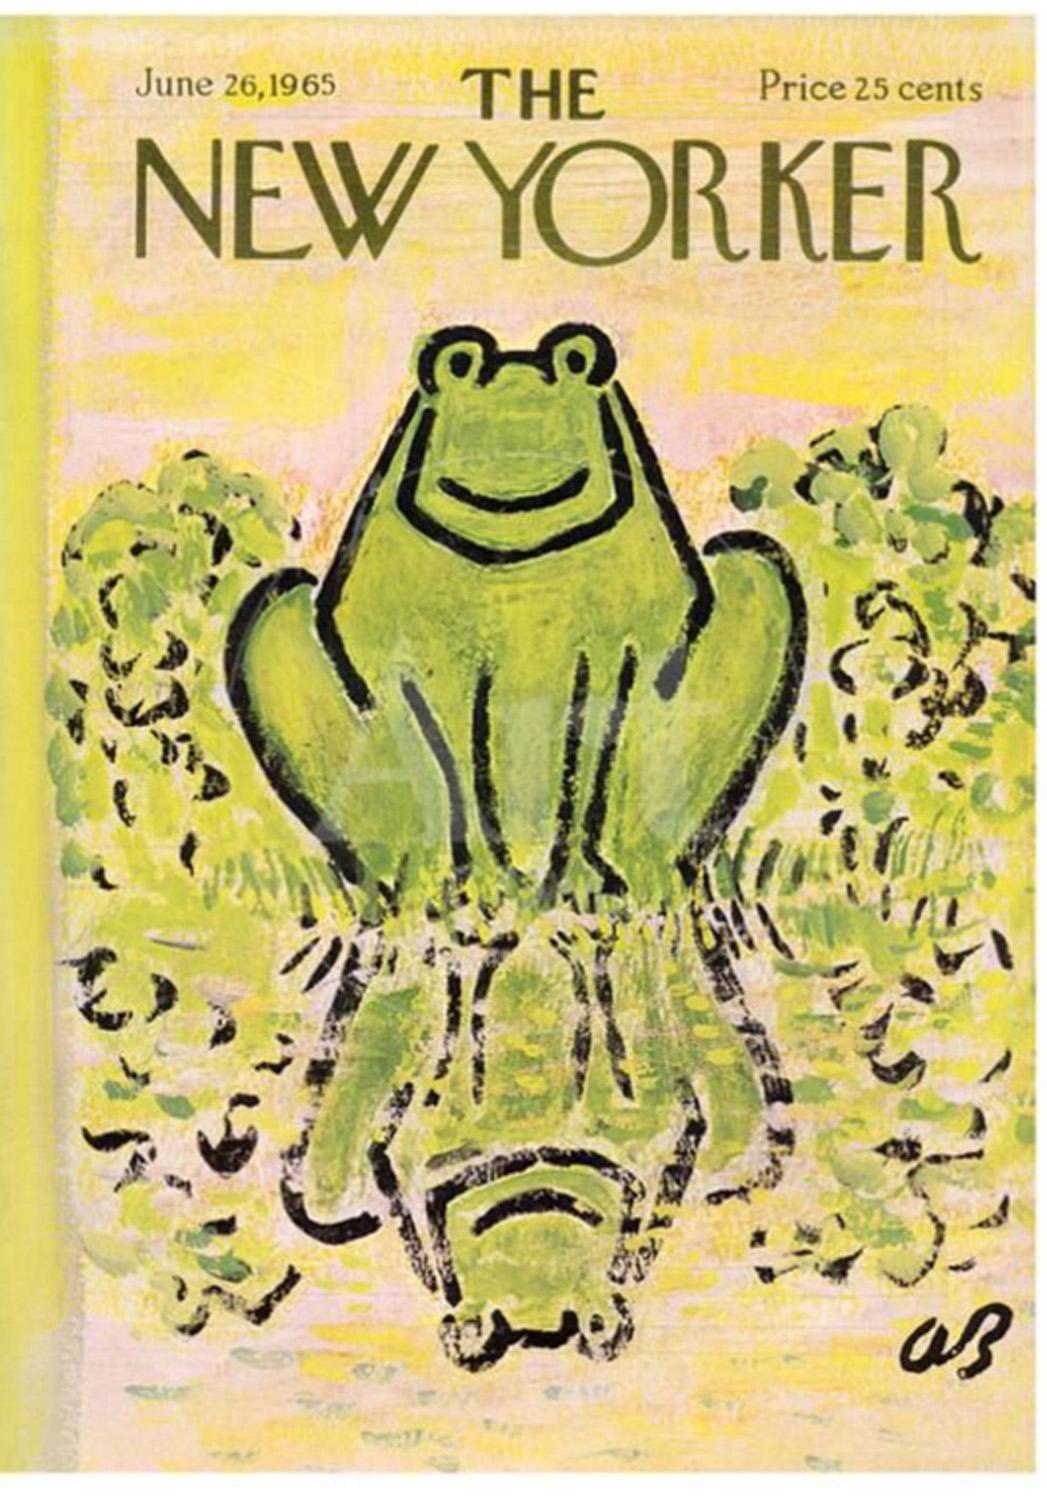 Colorful original artwork by Abe Birnbaum for the June 26, 1965 New Yorker cover. Done in vibrant greens, yellows, and pinks. Birnbaum, recipient of the Caldecott Honors in 1955 for 'Green Eyes' a children book (1899-1966) did over 150 New Yorker